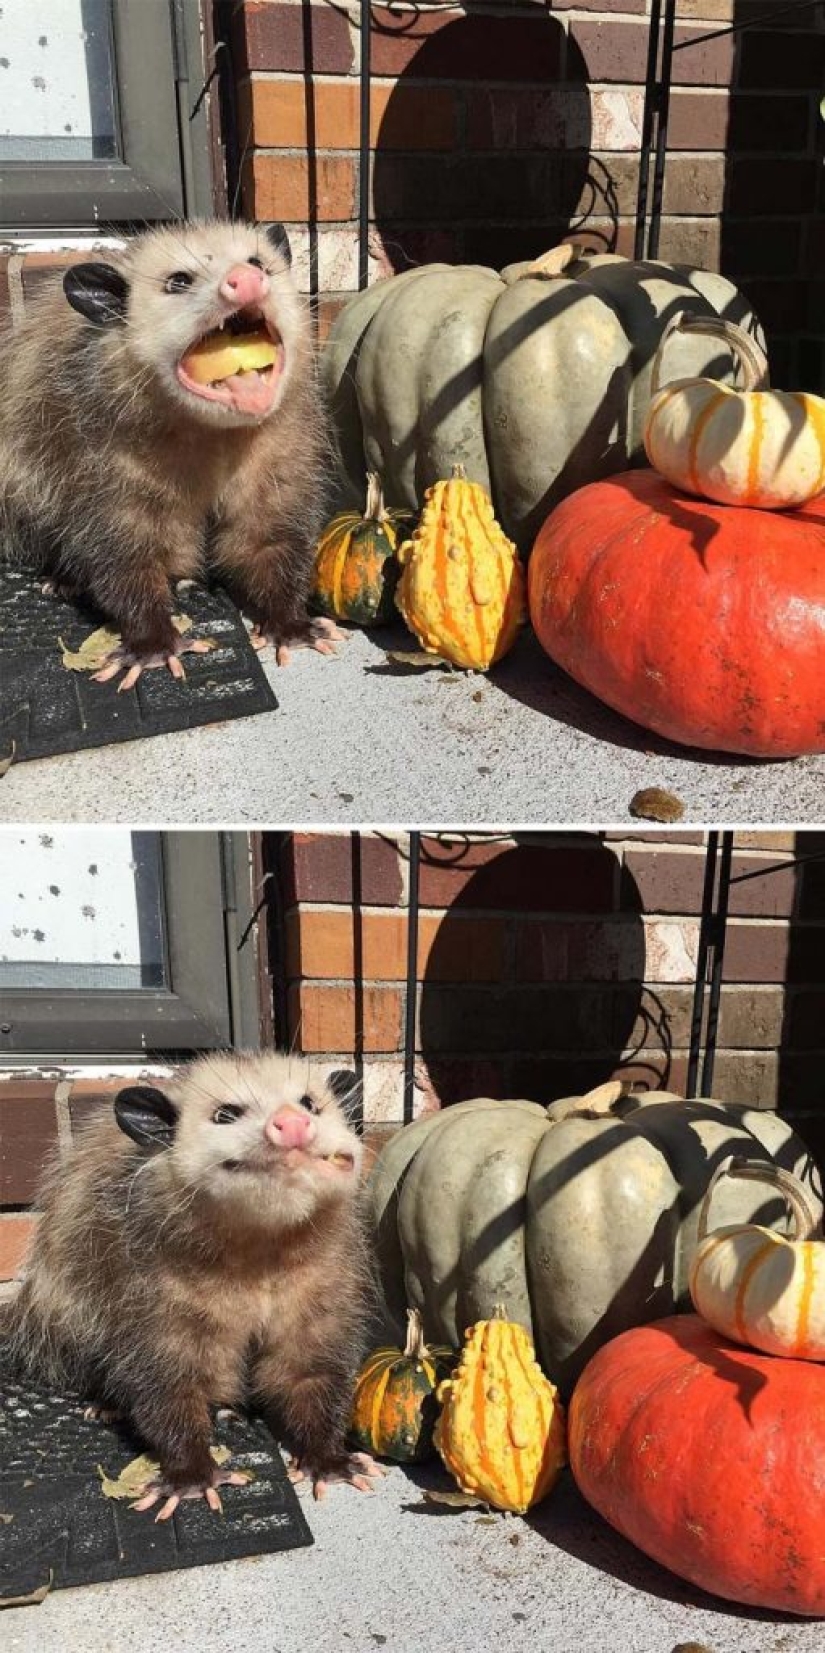 Opossums doing ridiculous and adorable things